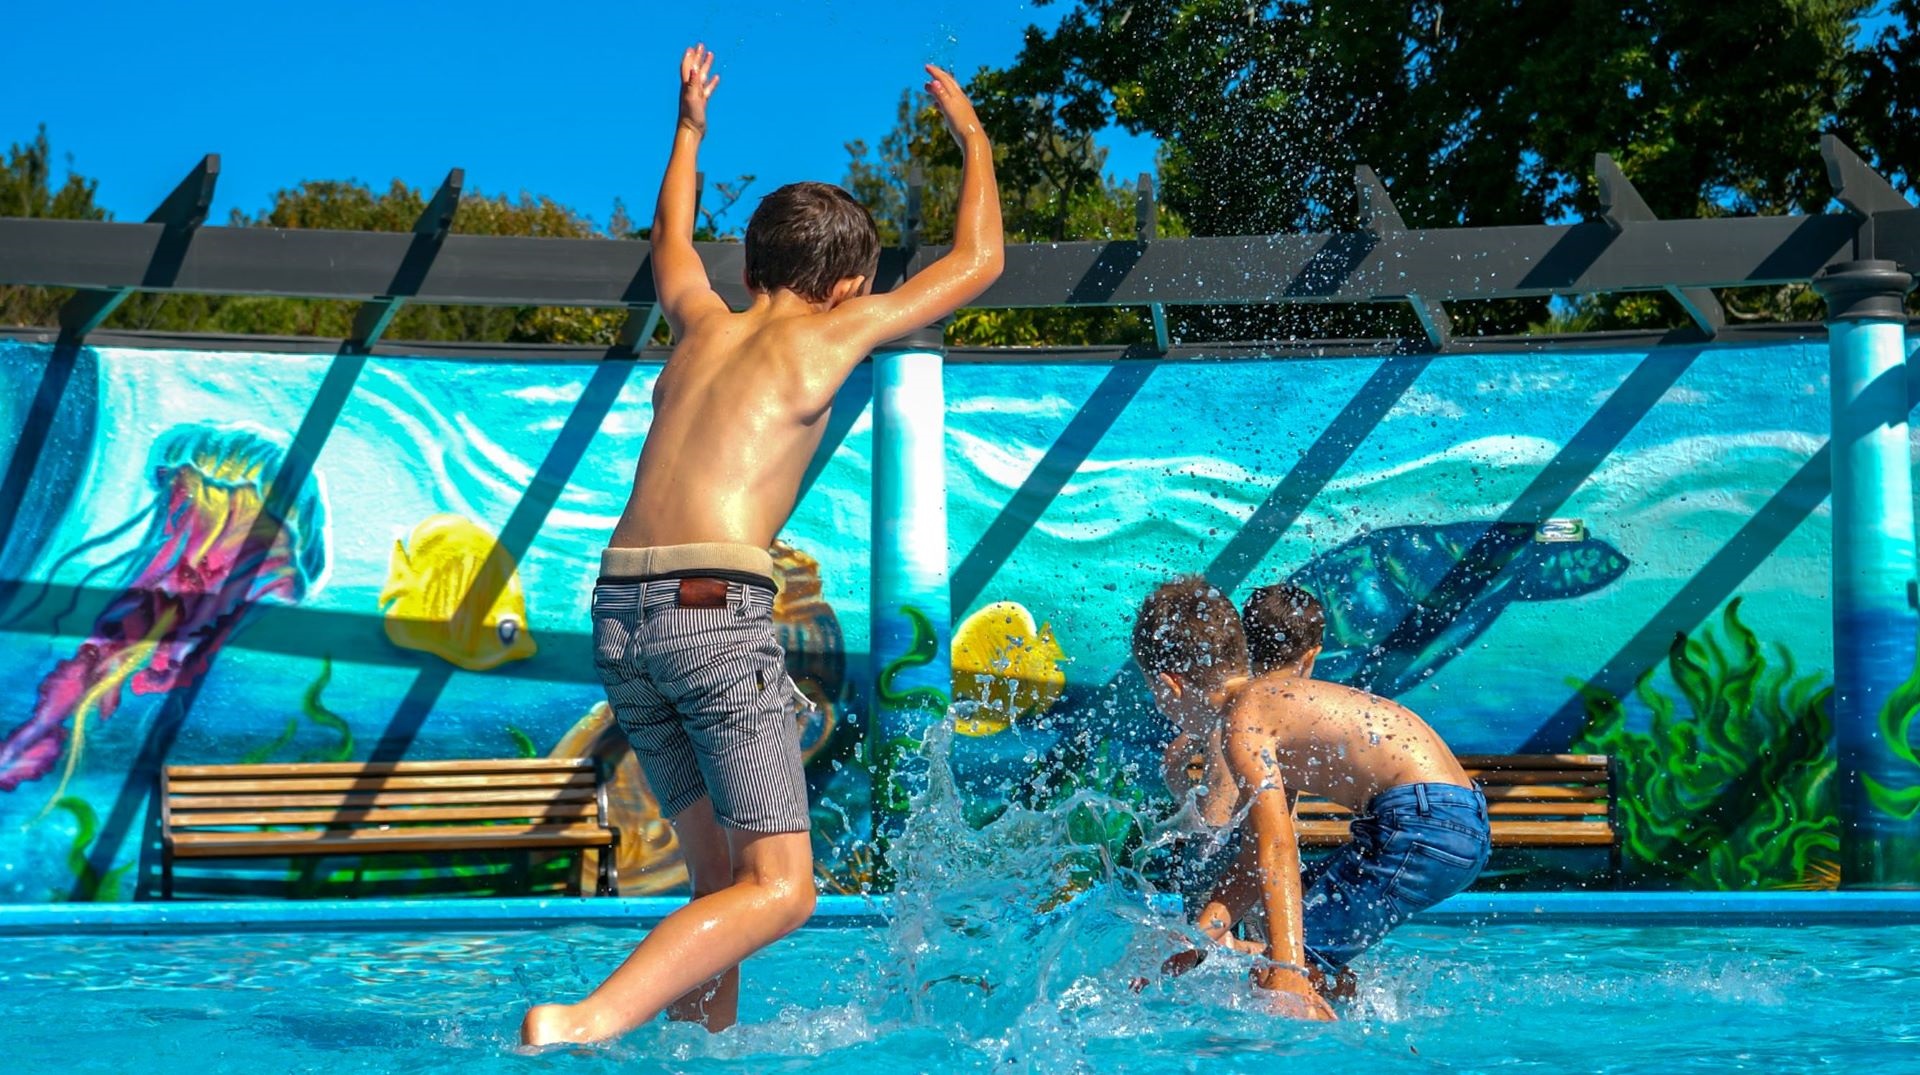 Photo shows children splashing each other at the pool.